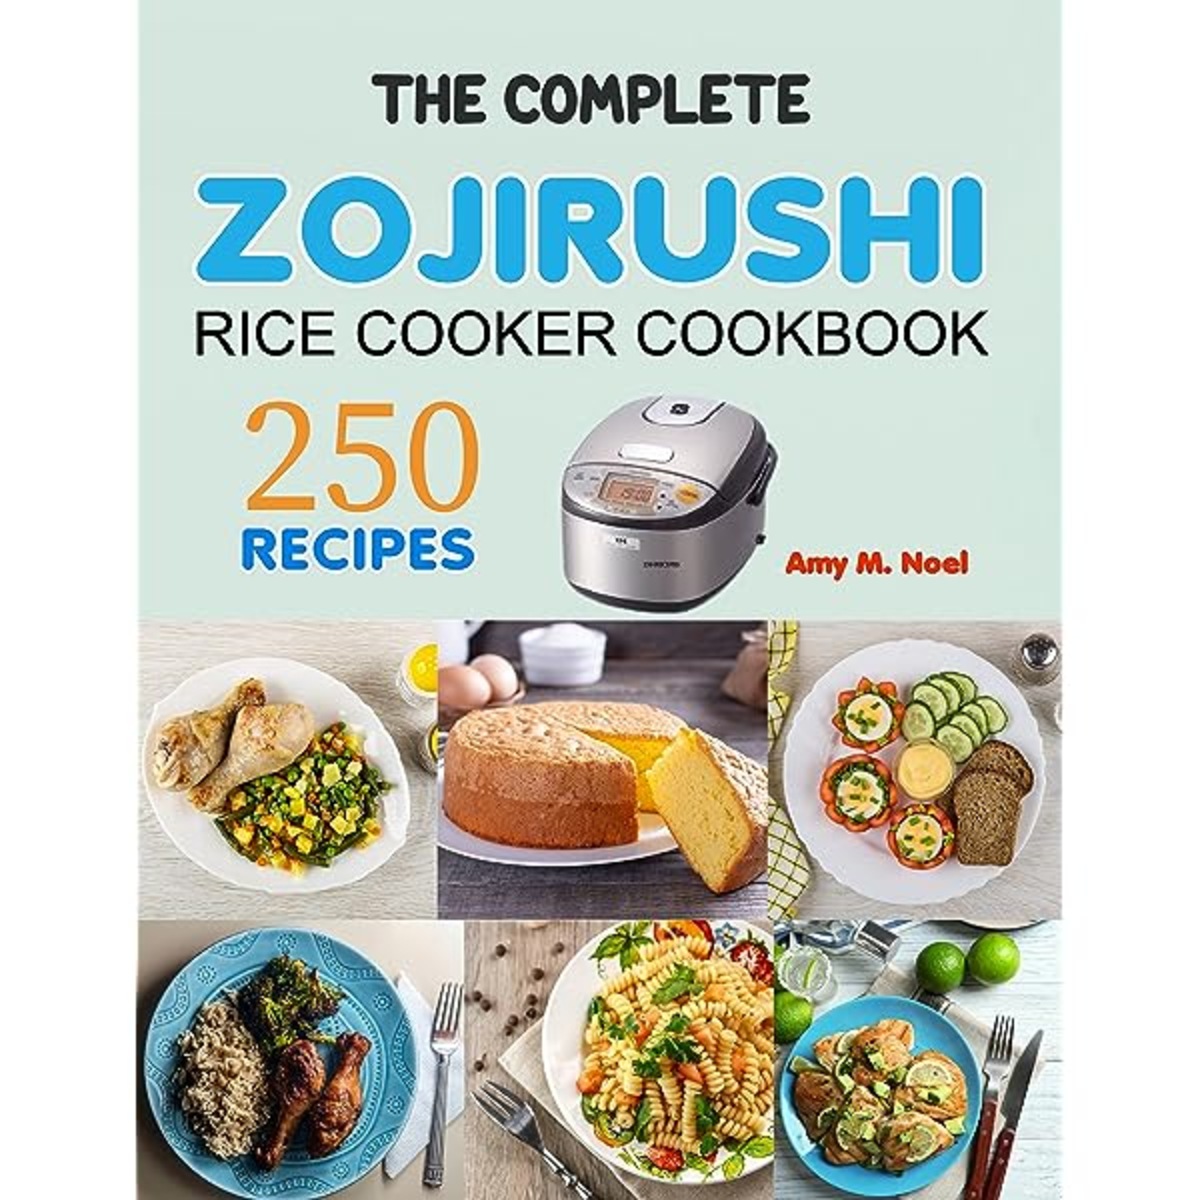 Simply the Best: Rice Cooker Recipes by Getz, Marian